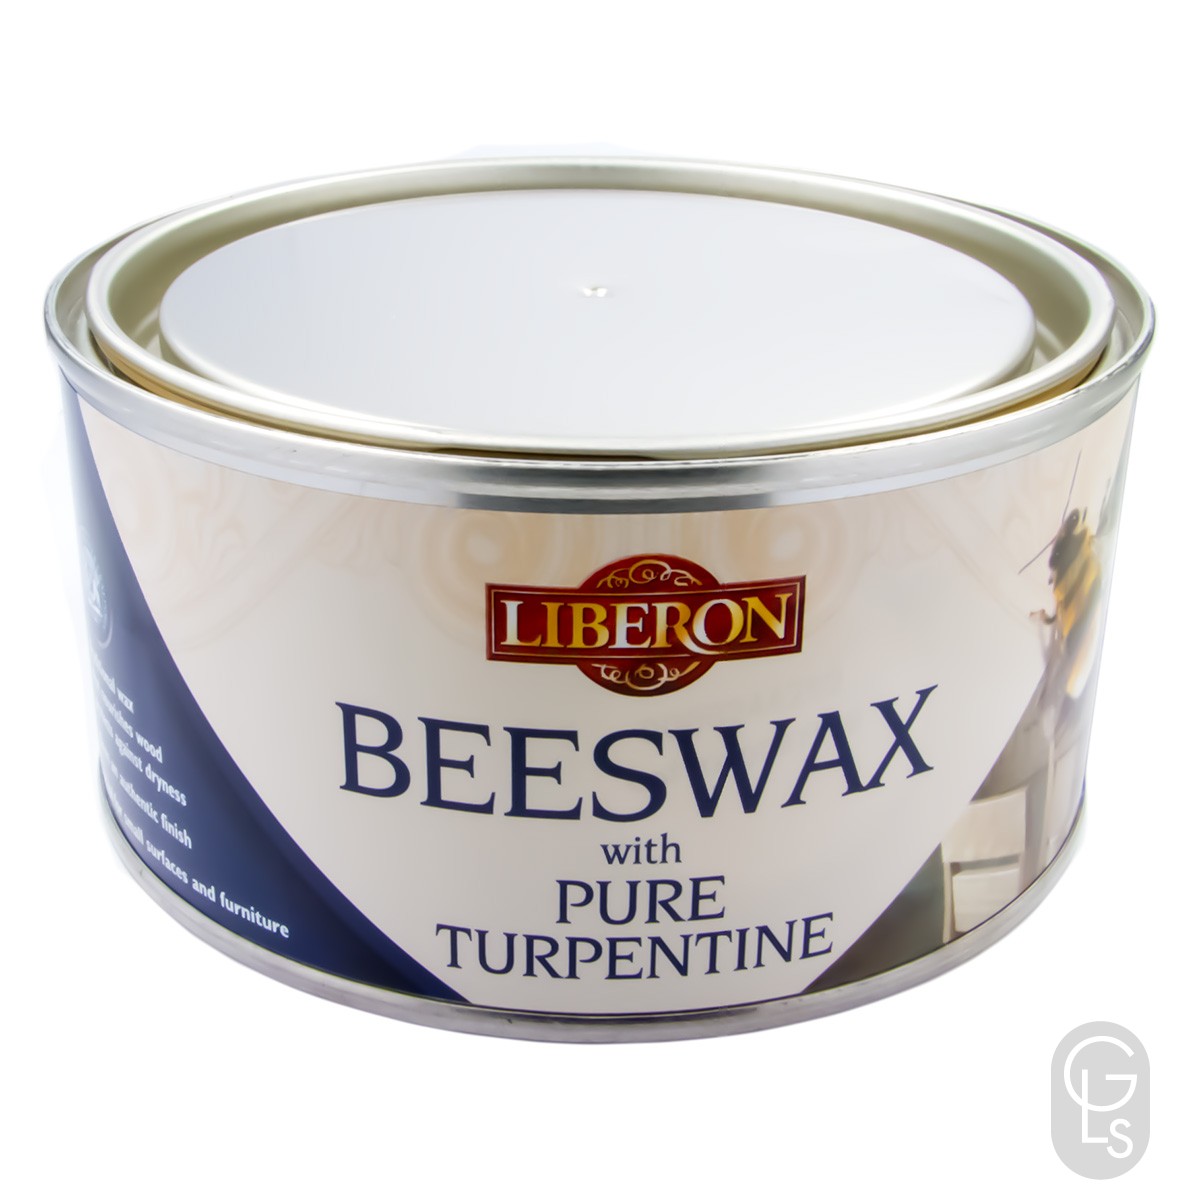 Liberon Beeswax Paste with Pure Turpentine - 500ml